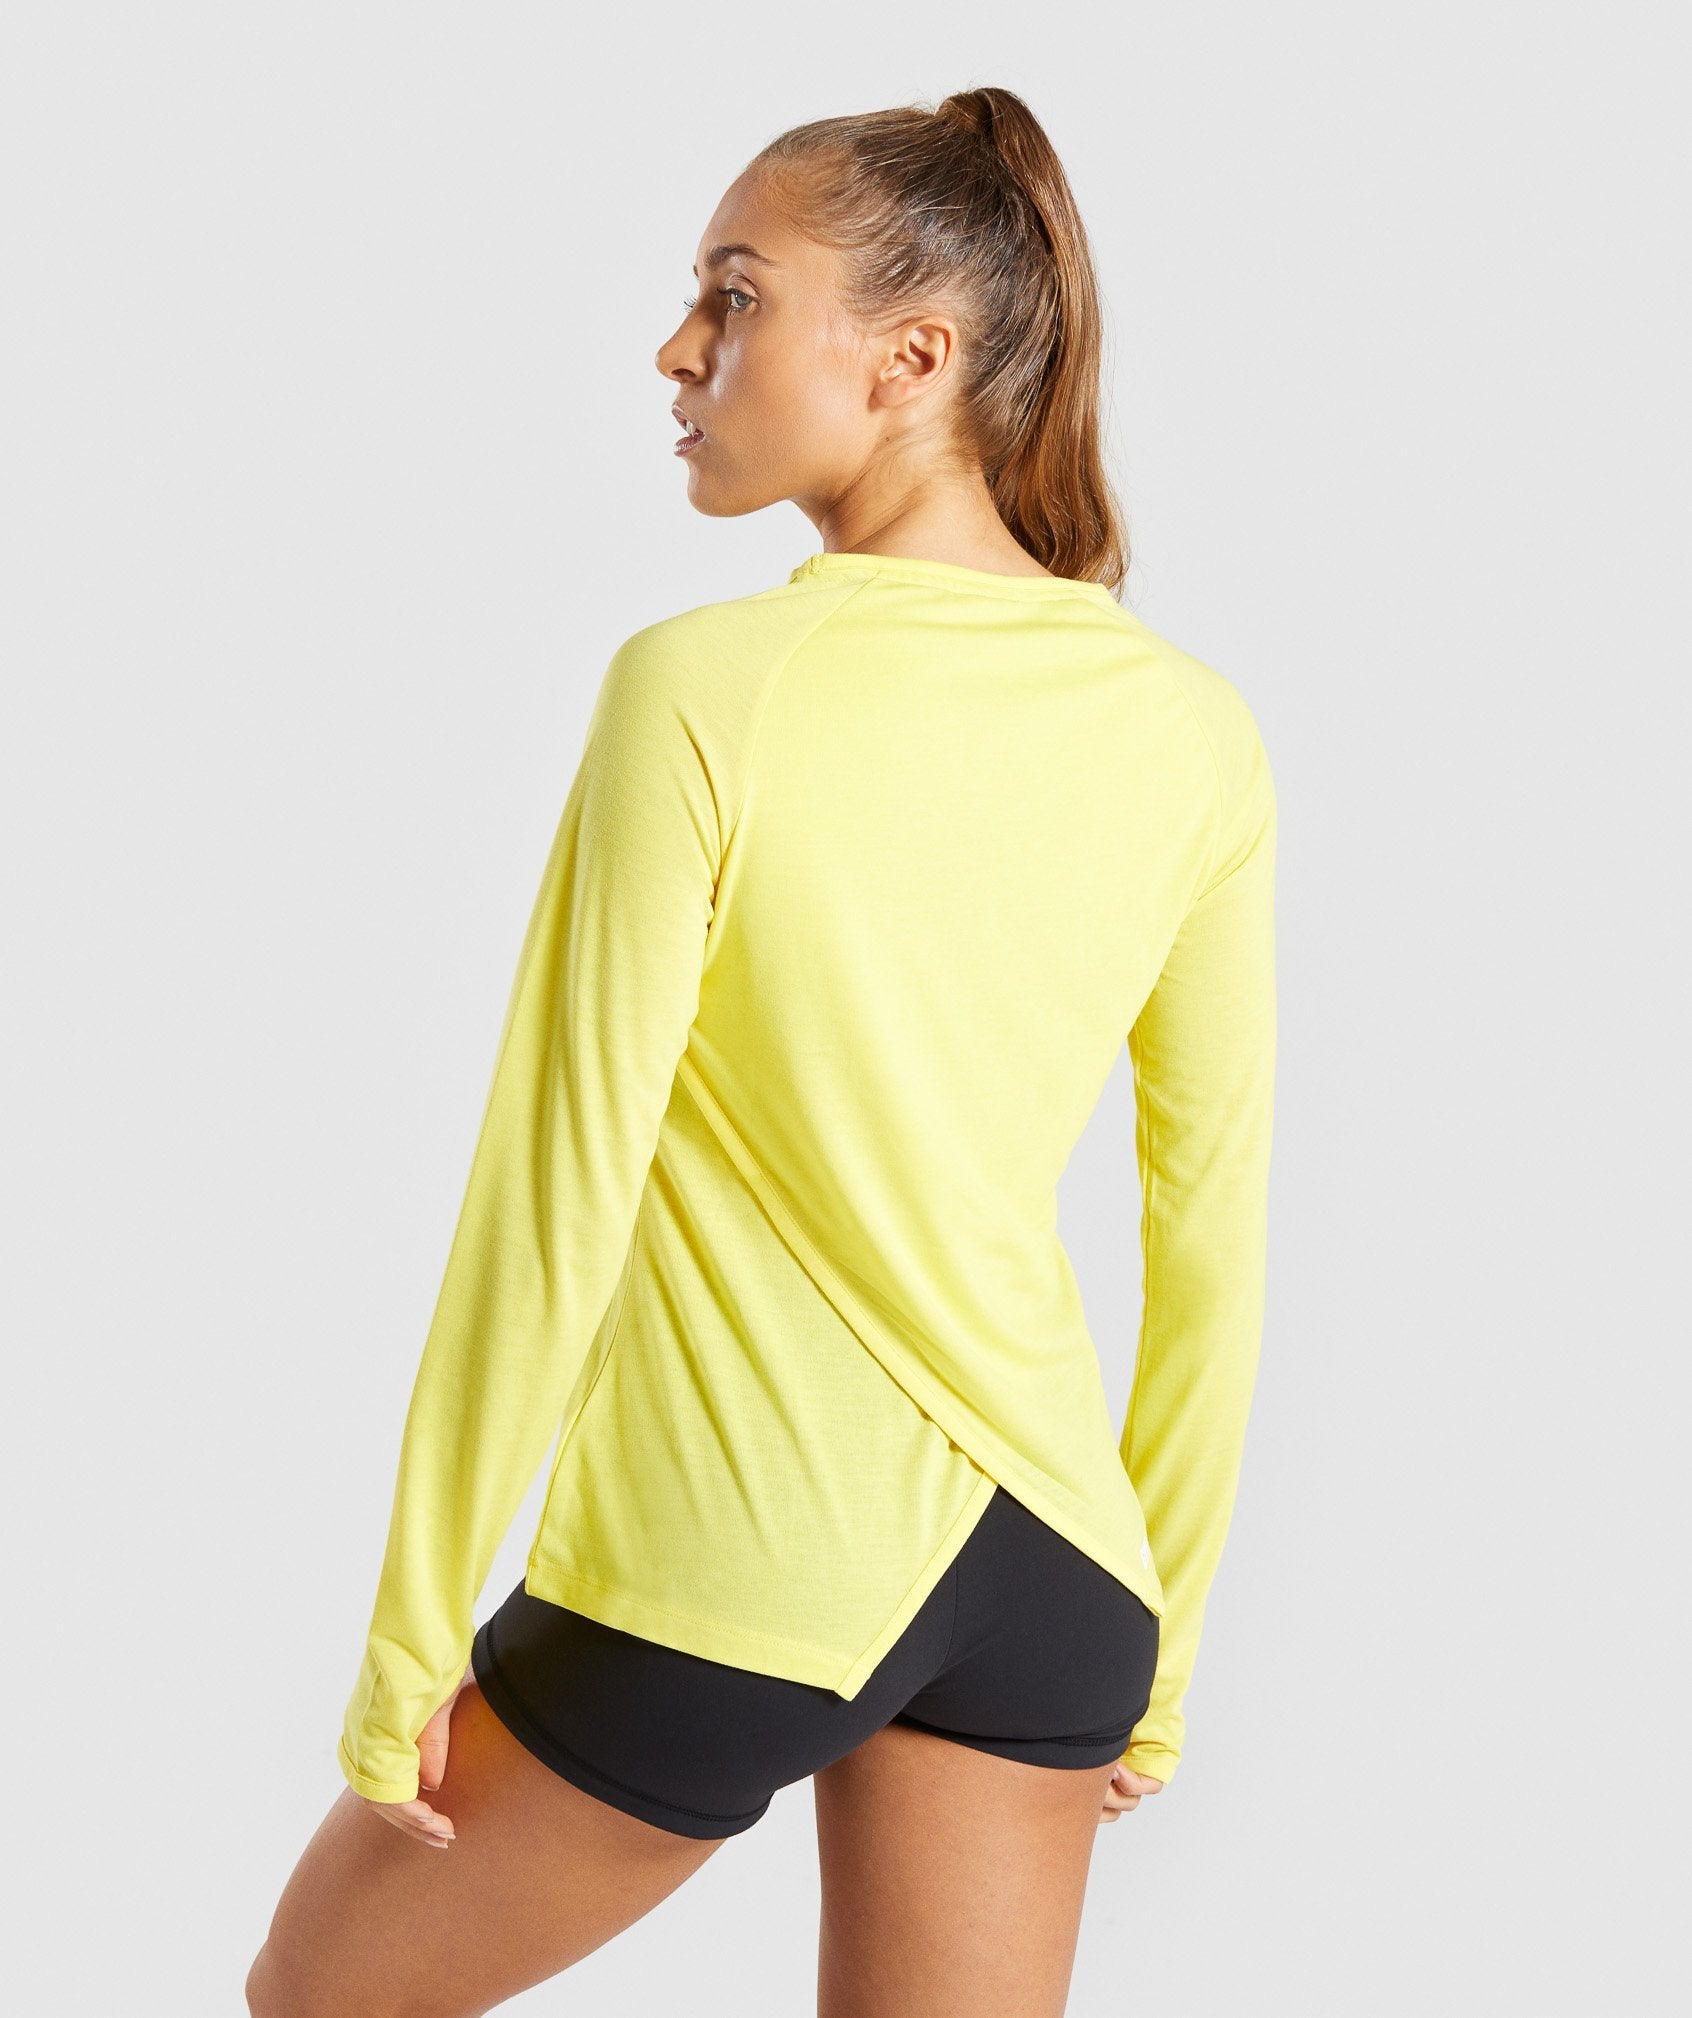 Primary Open Cross Back Long Sleeve in Pop Yellow - view 2